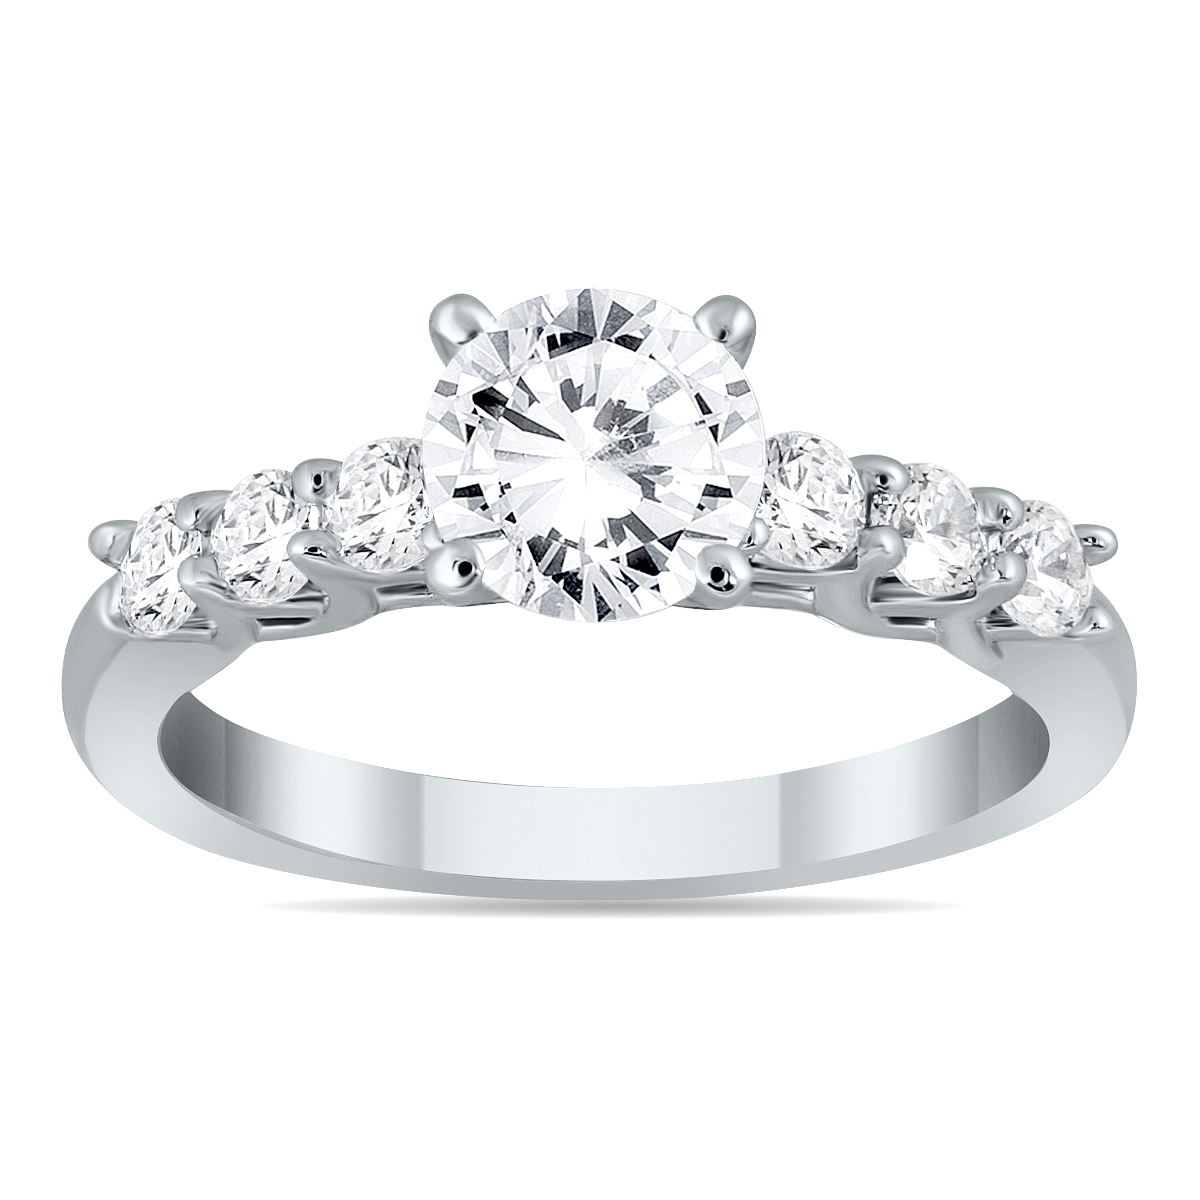 szul.com AGS Certified 1 3/8 Carat TW Seven Stone Engagement Ring in 14K White Gold (J-K Color, I2-I3 Clarity